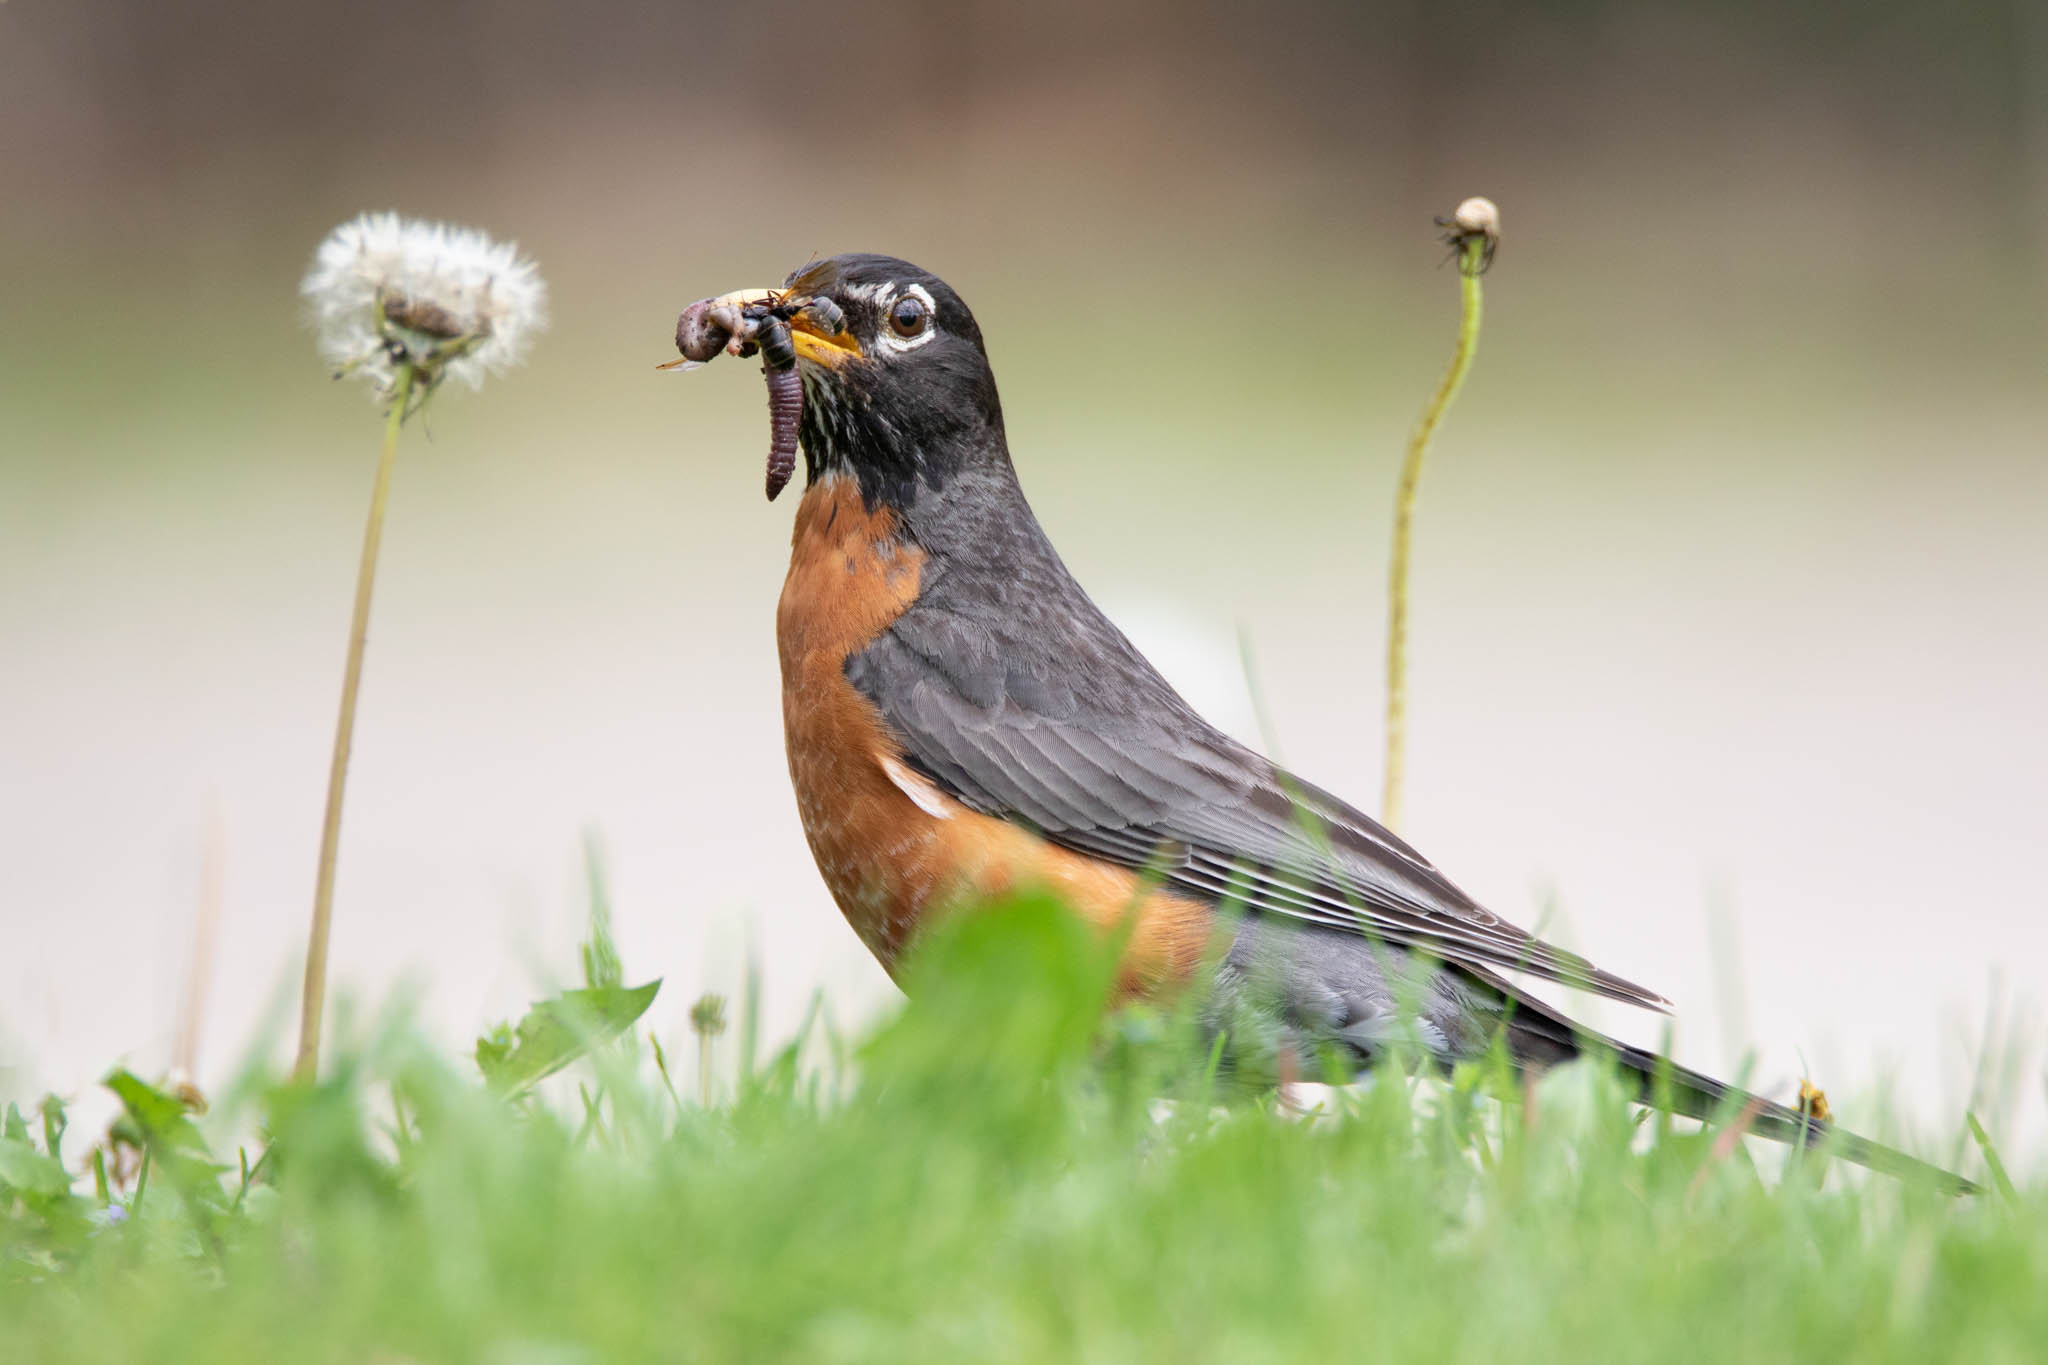 Robin eating a worm, Meal by Jayme Spoolstra, Photography Scavenger Hunt